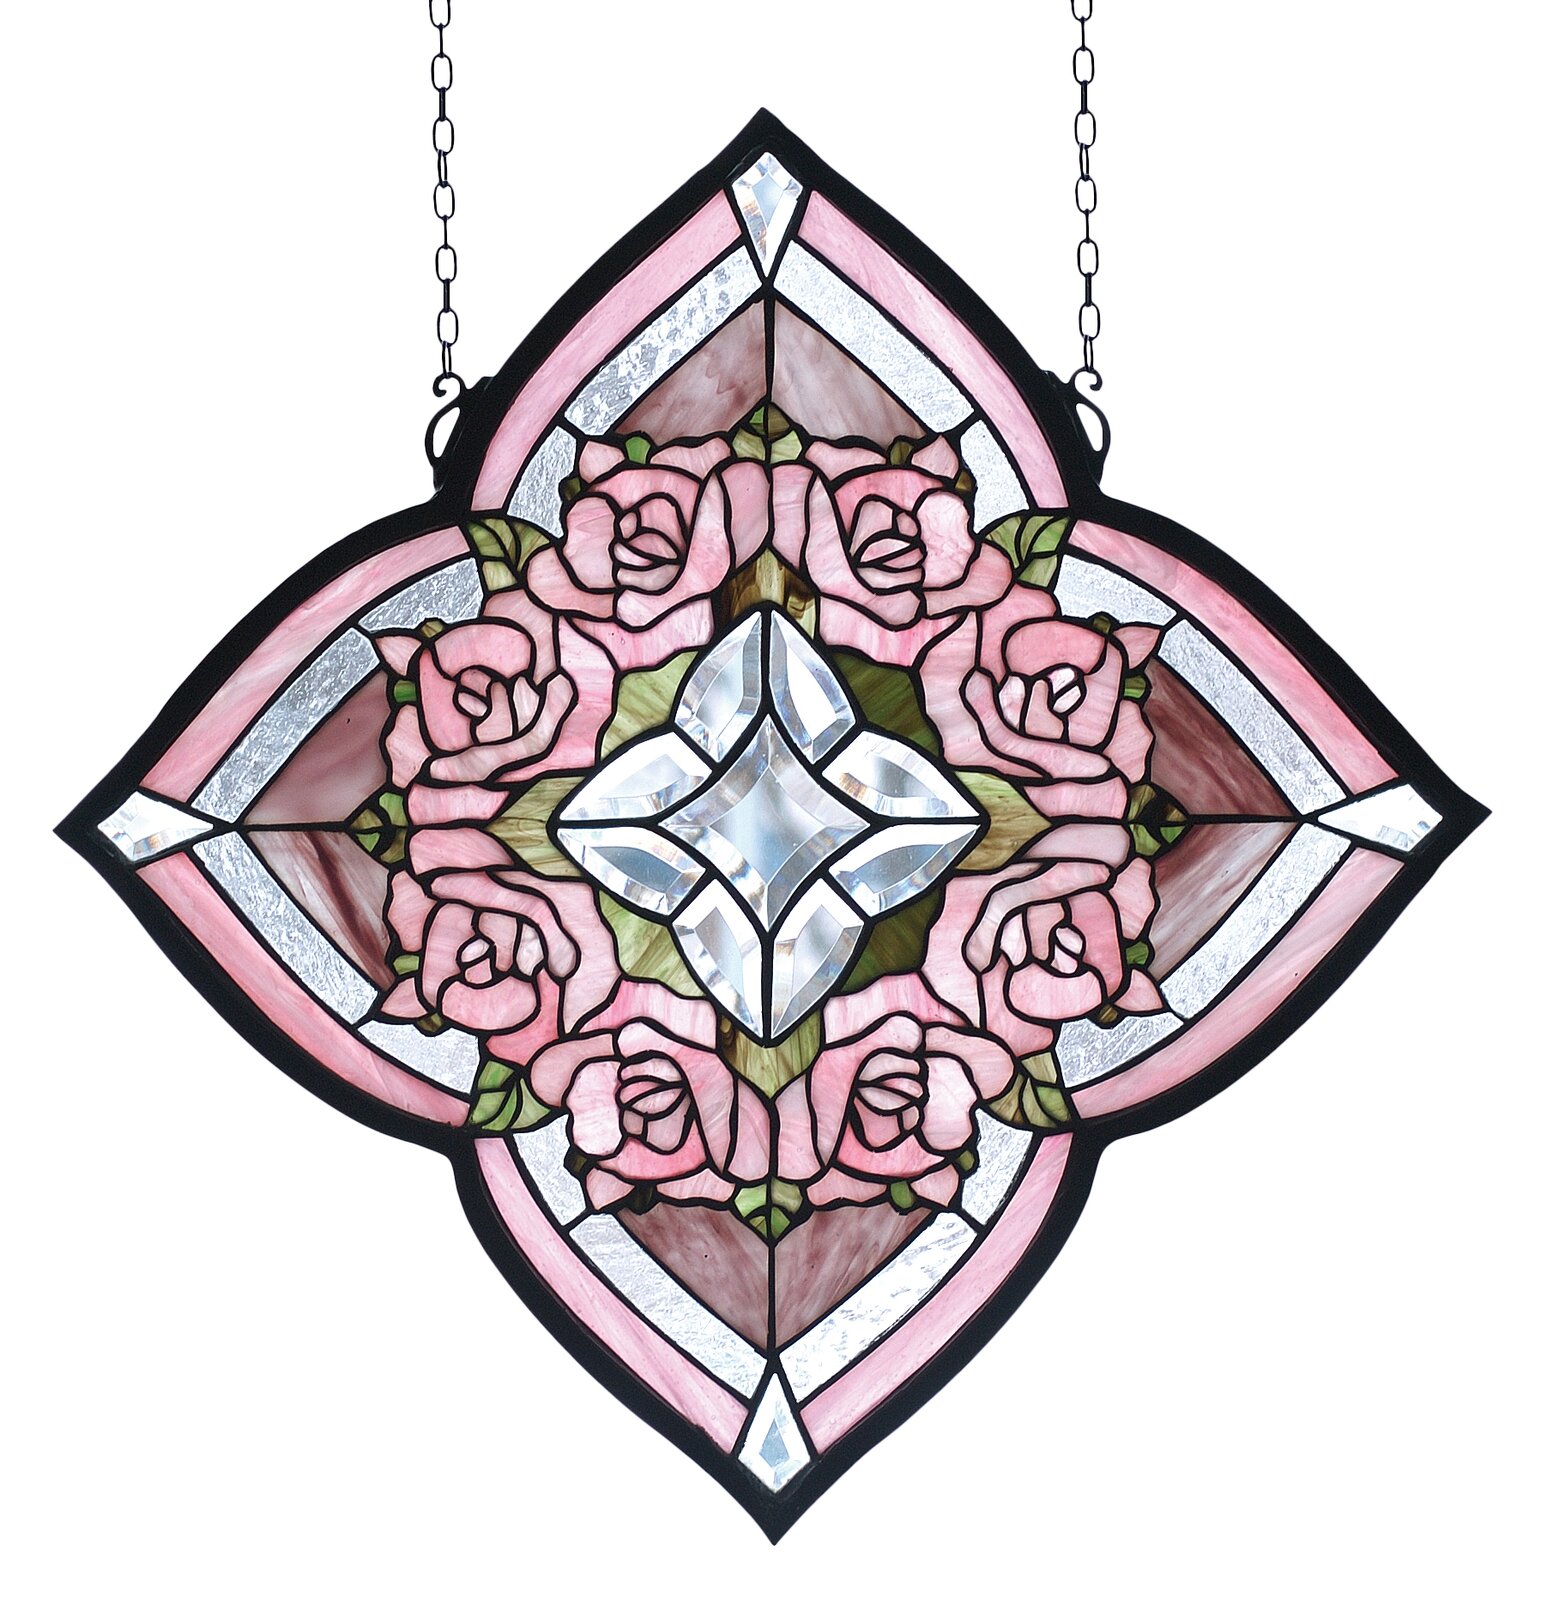 Floral Stained Glass Wall Art - Weissman Ring of Roses Stained Glass Window